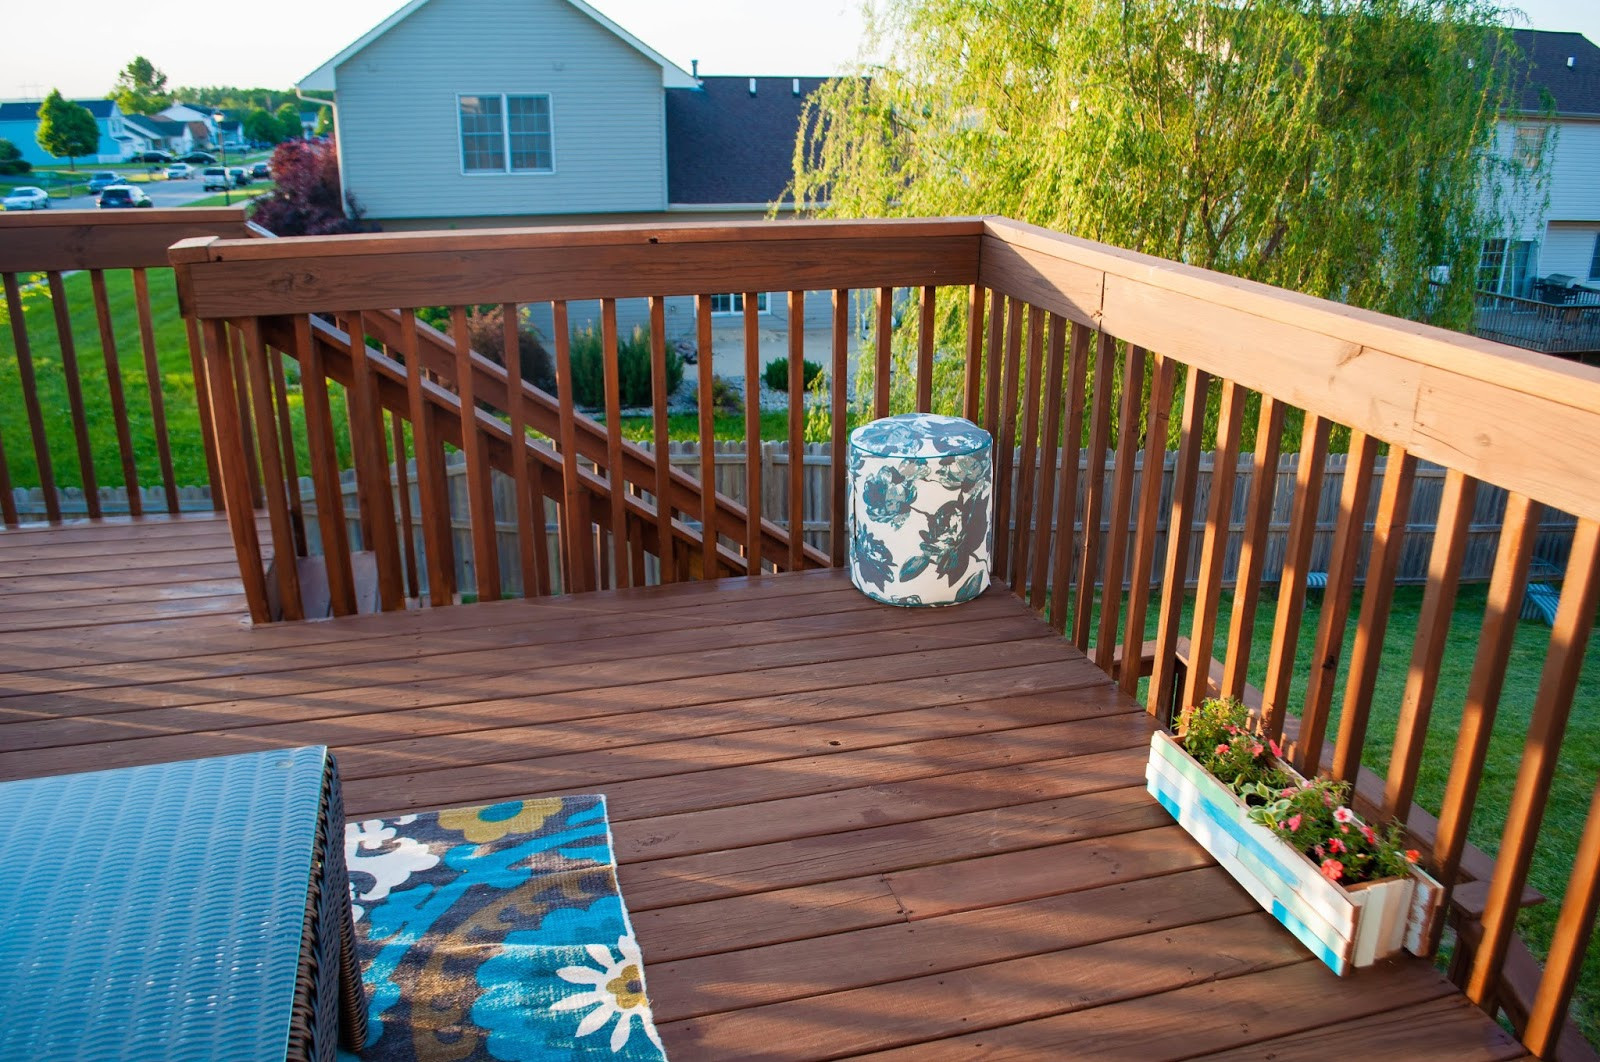 Sherwin Williams Deck Paint
 Deck Sherwin Williams Superdeck Applied To Your Home